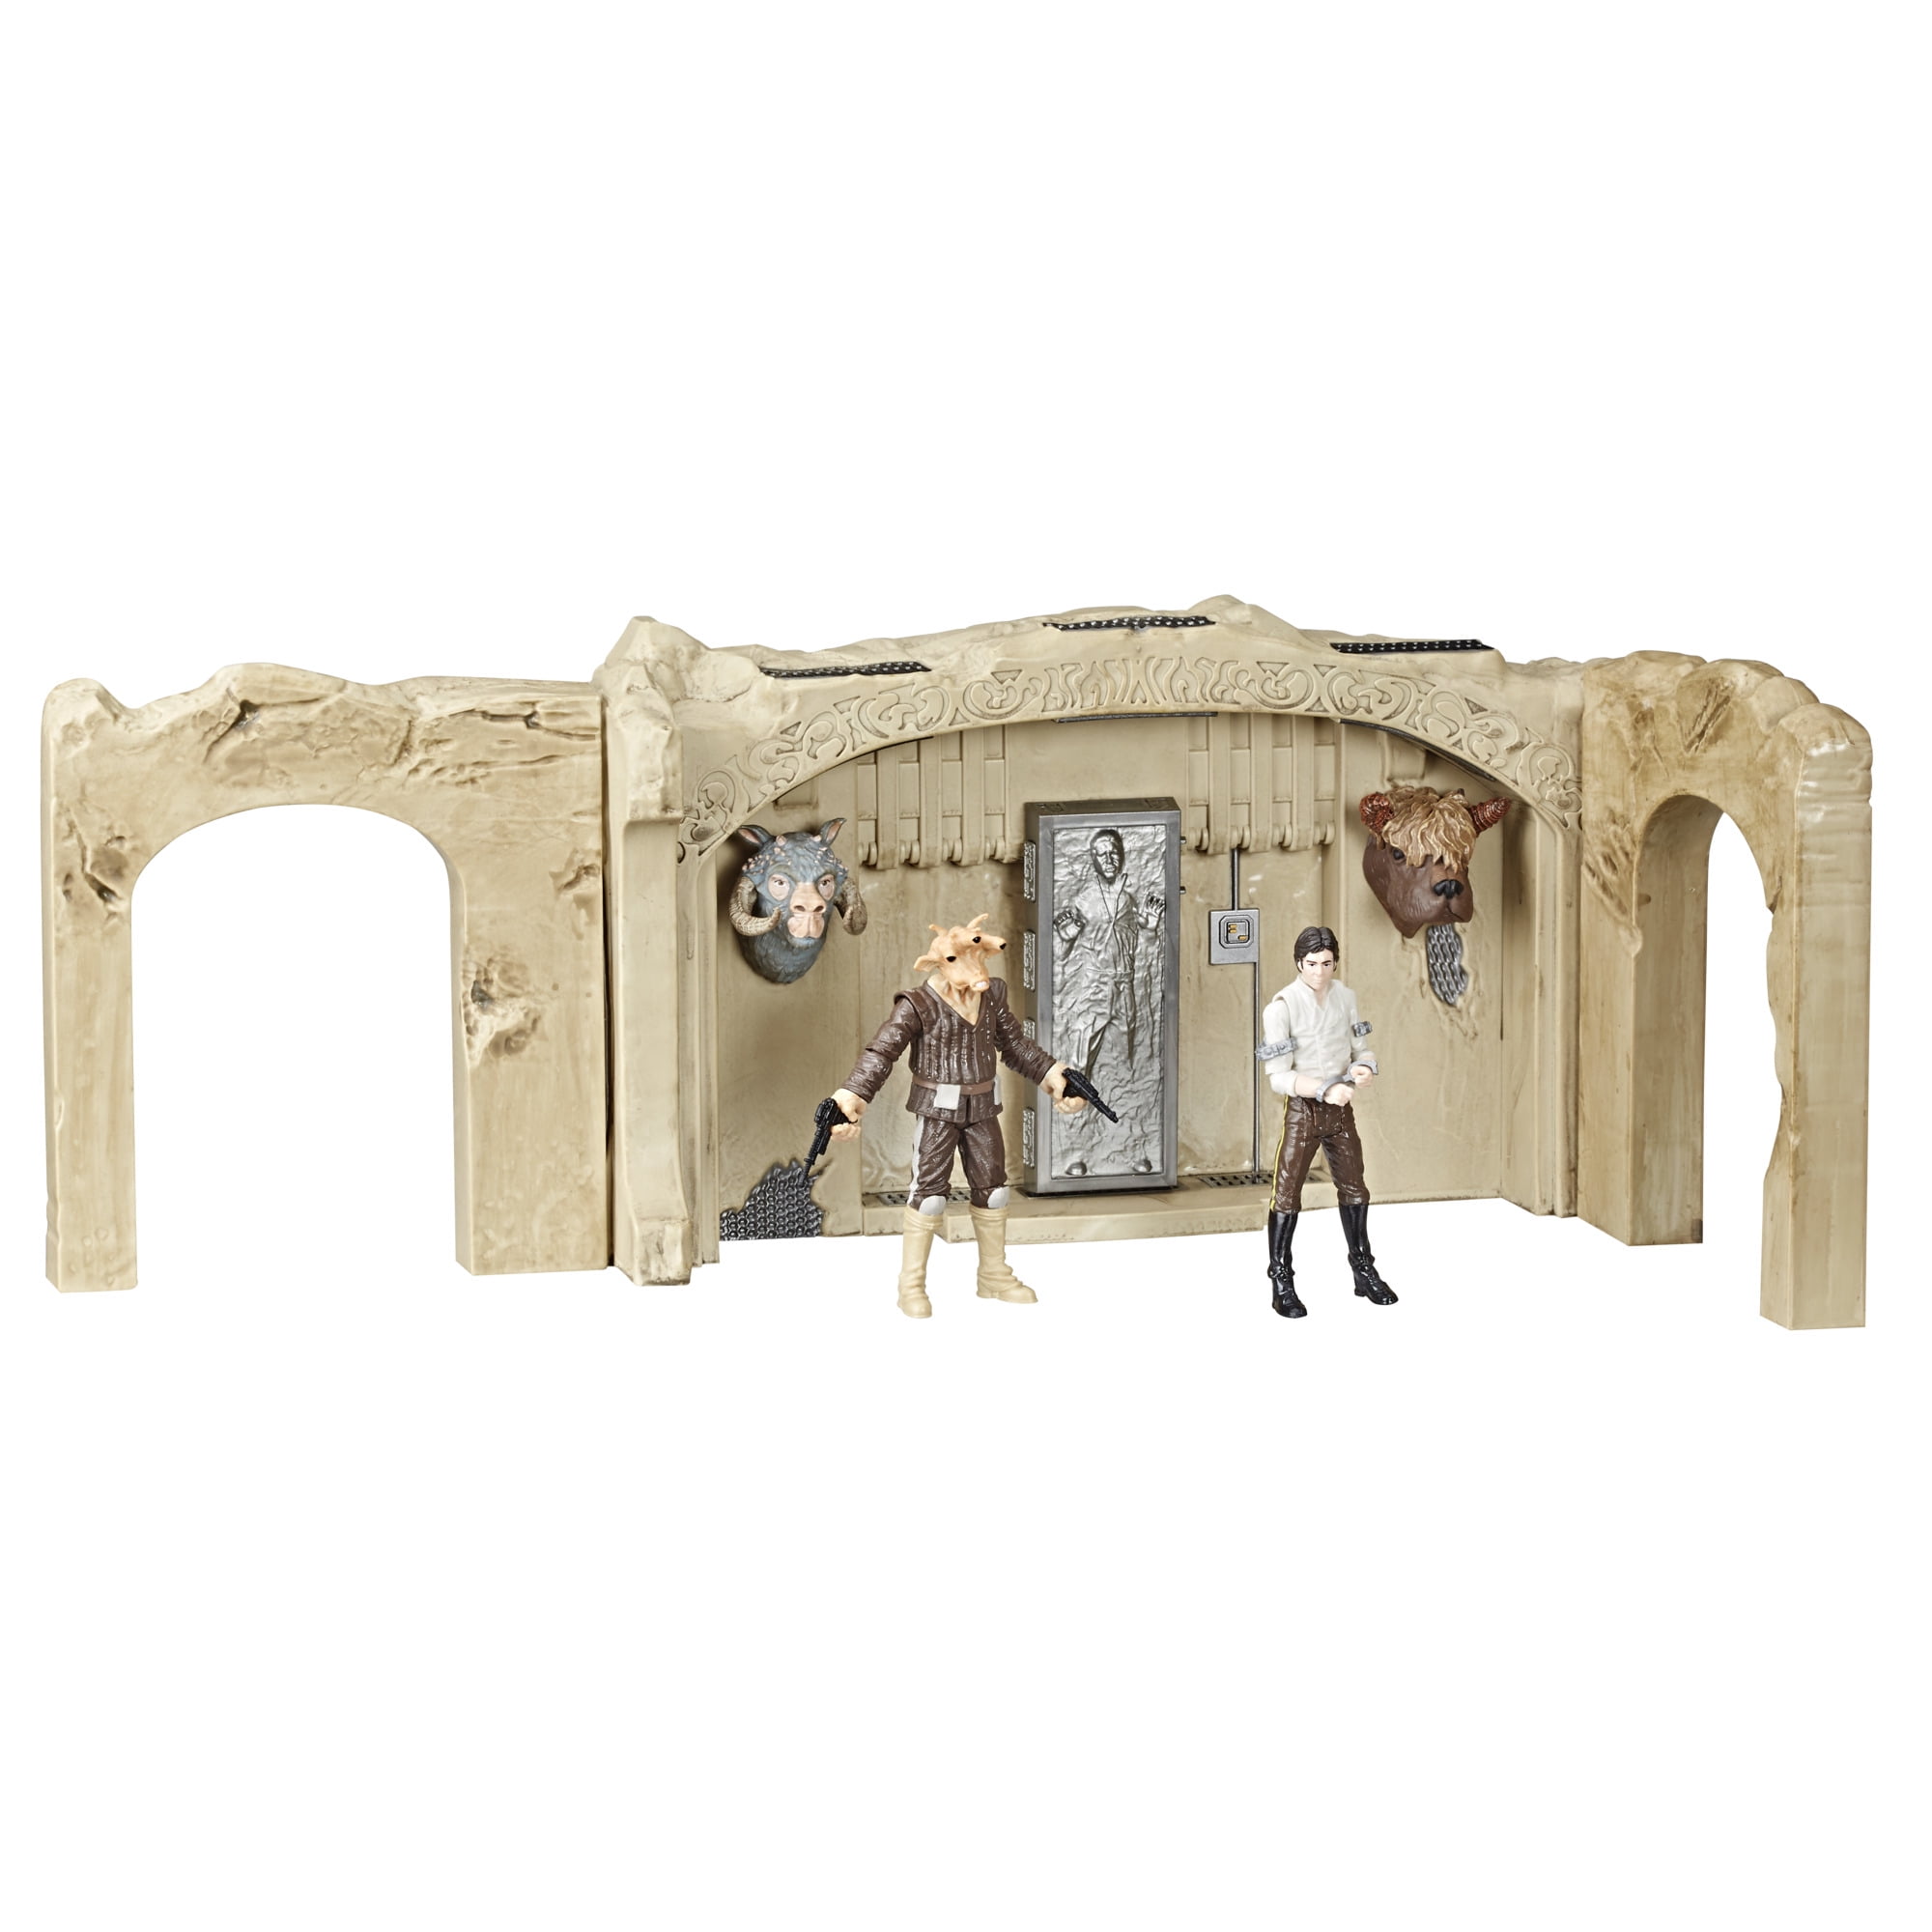 STAR WARS VINTAGE COLLECTION JABBA'S PALACE ADVENTURE SET WALMART EXCLUIVE NEW 